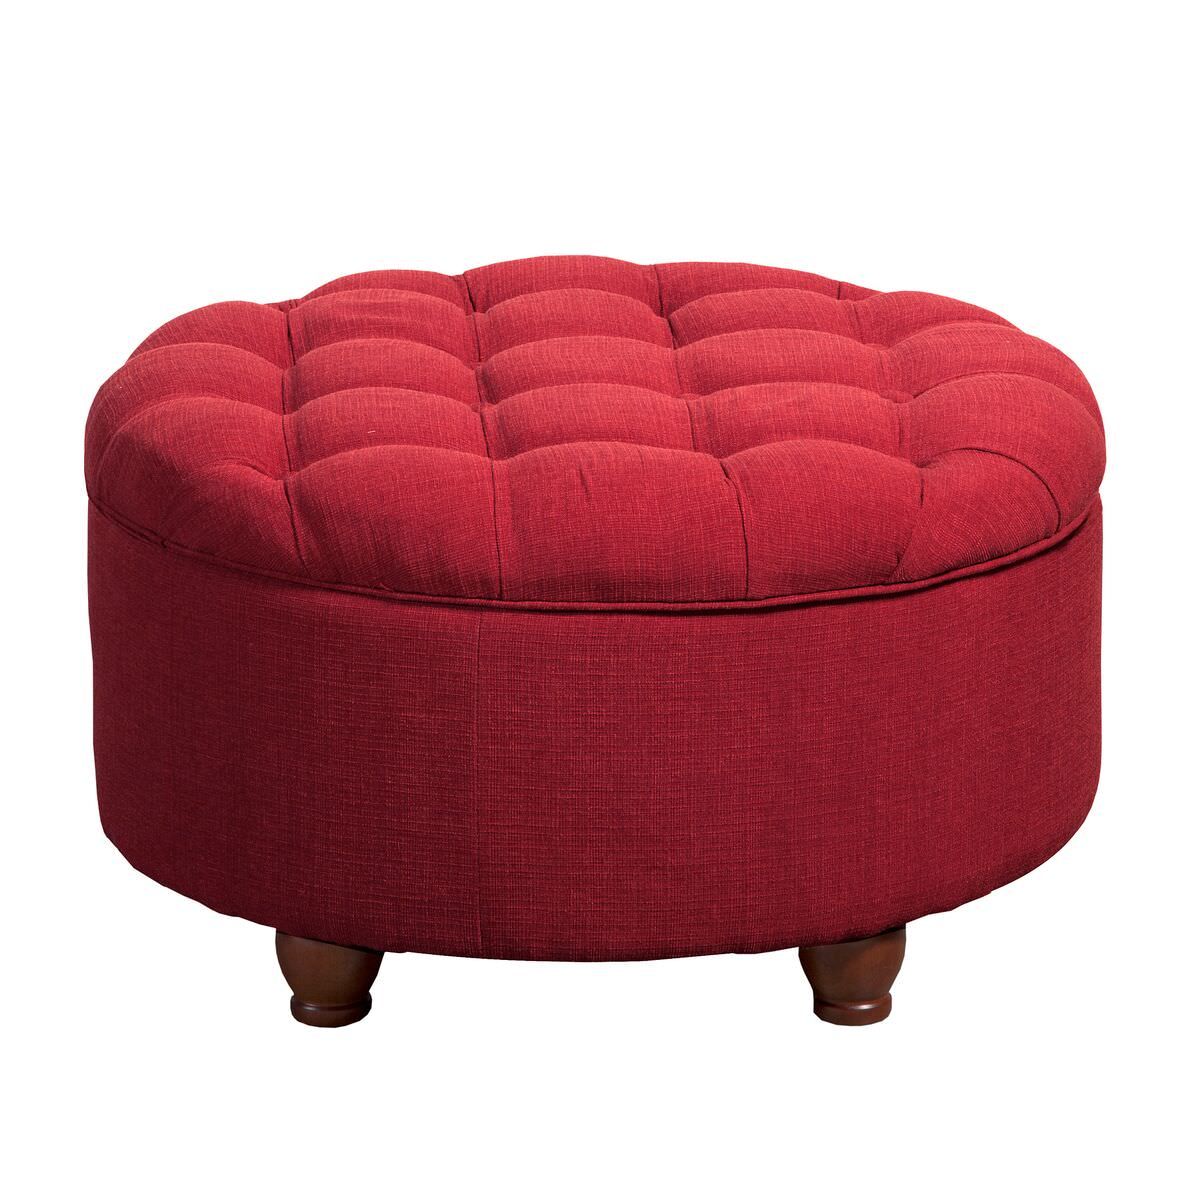 Homepop Tufted Round Cocktail Storage Ottoman, Red Textured Fabric With Regard To Snow Tufted Fabric Ottomans (View 14 of 20)